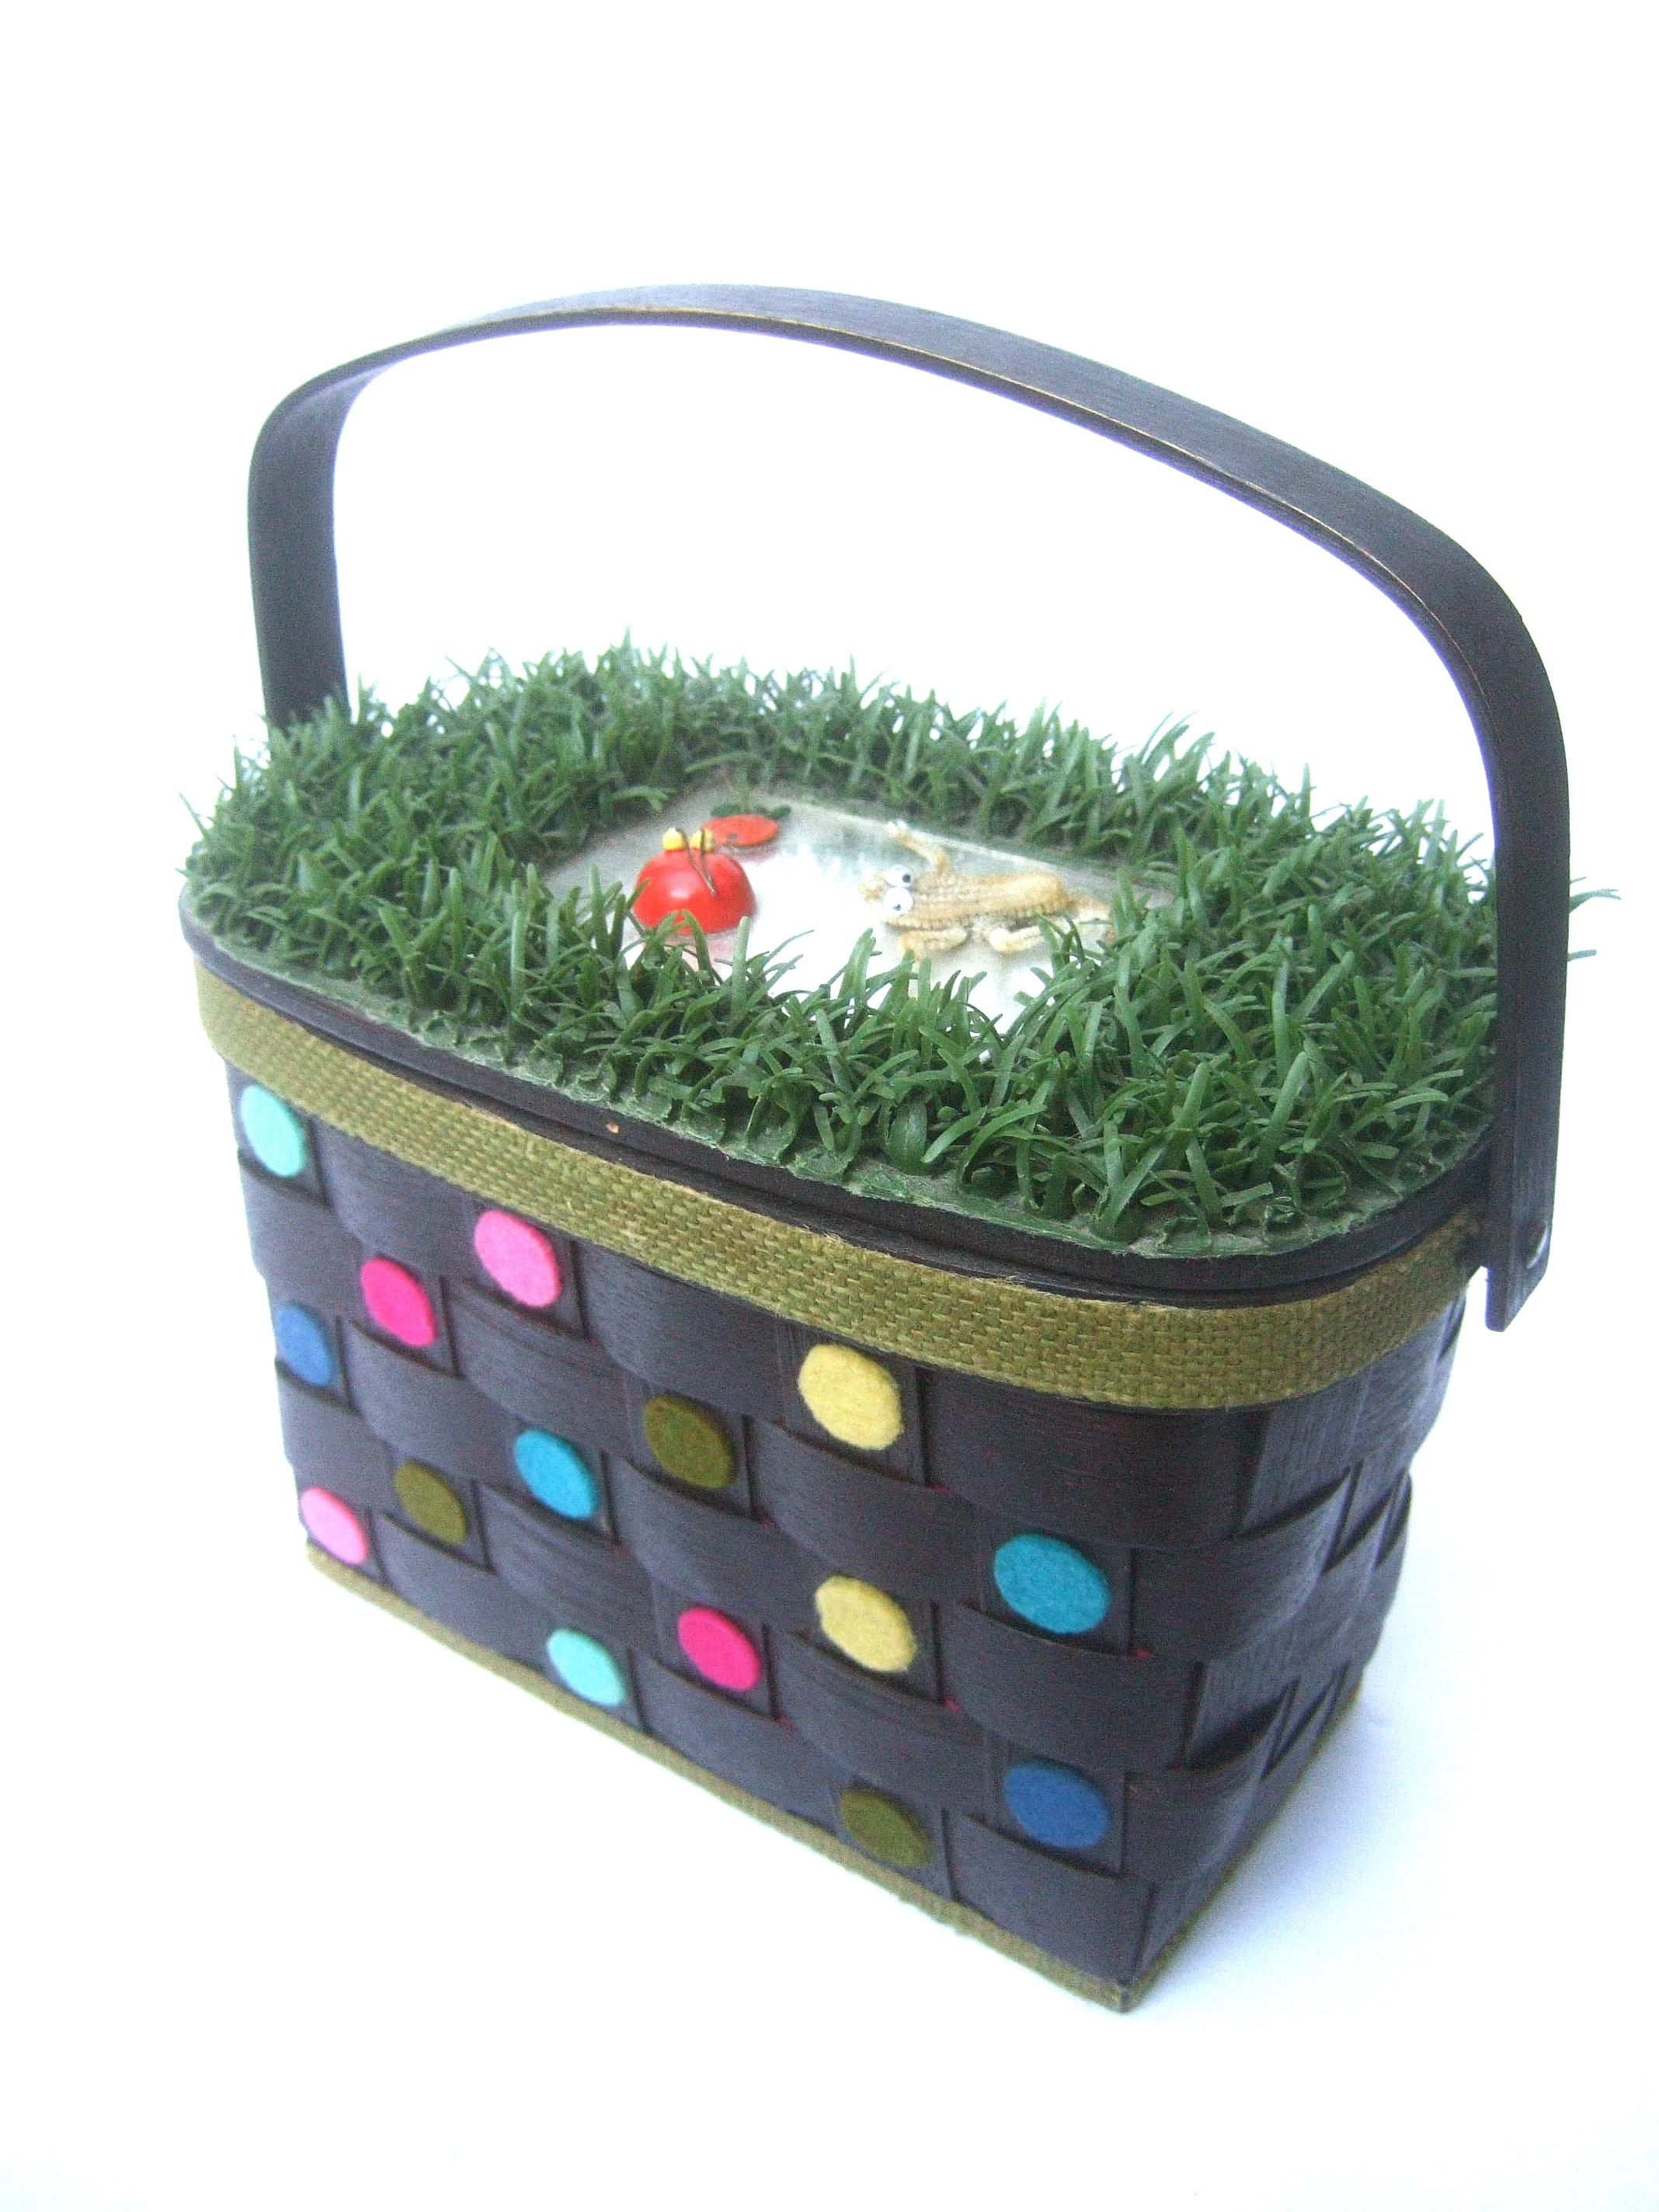 Whimsical Quirky Astro Turf  Wicker Handmade Basket Purse circa 1970 For Sale 1